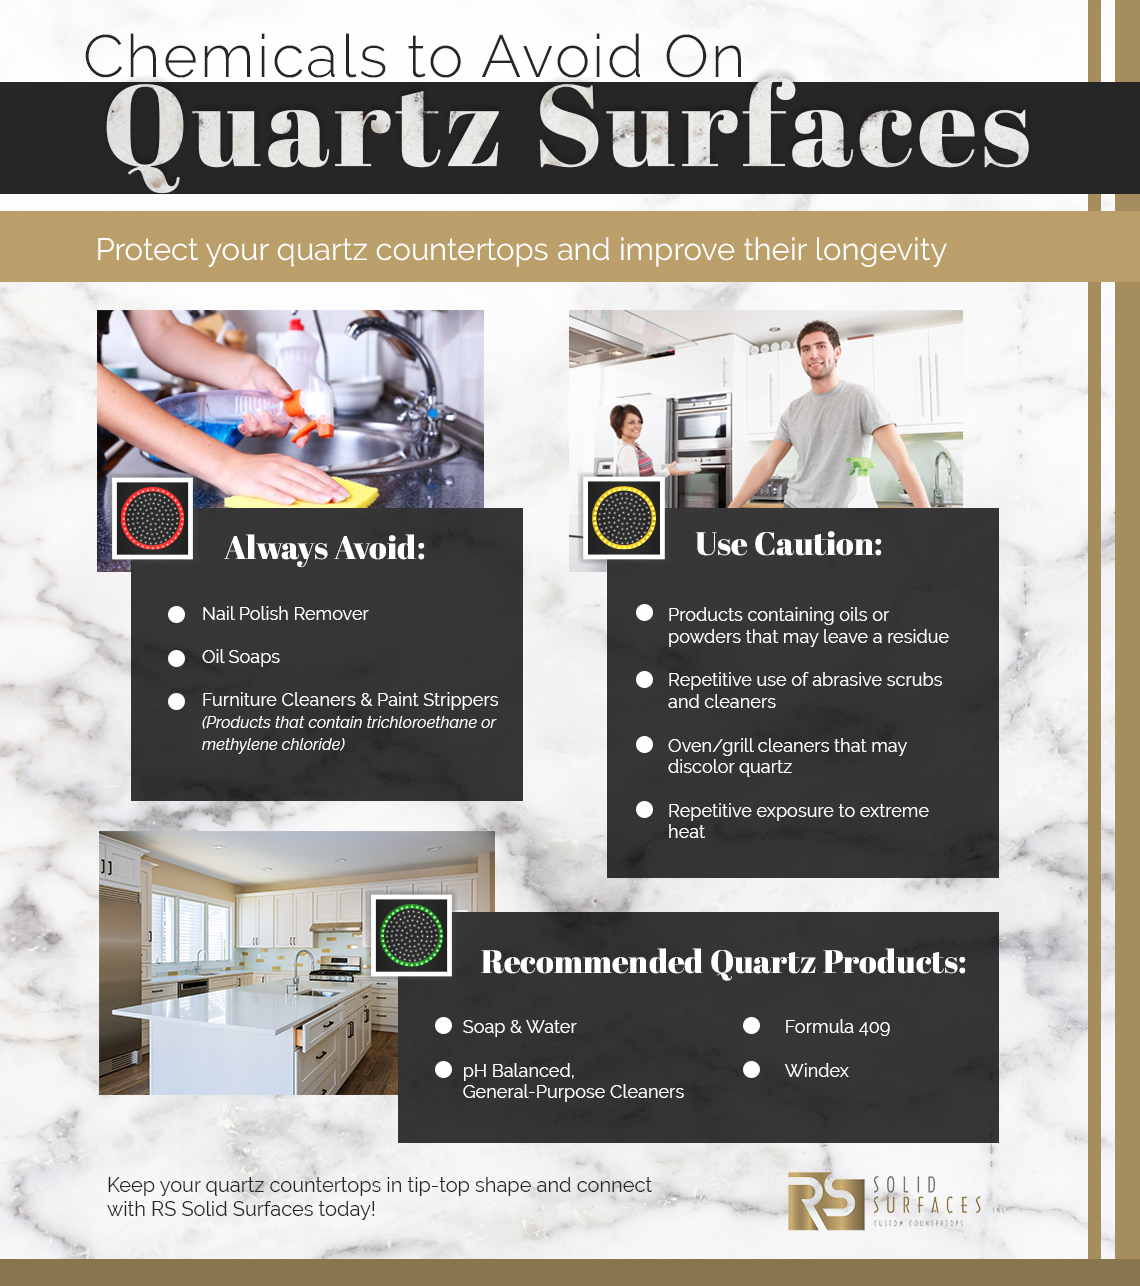 Quartz Care Tending To Your, Can I Use 409 On My Quartz Countertops